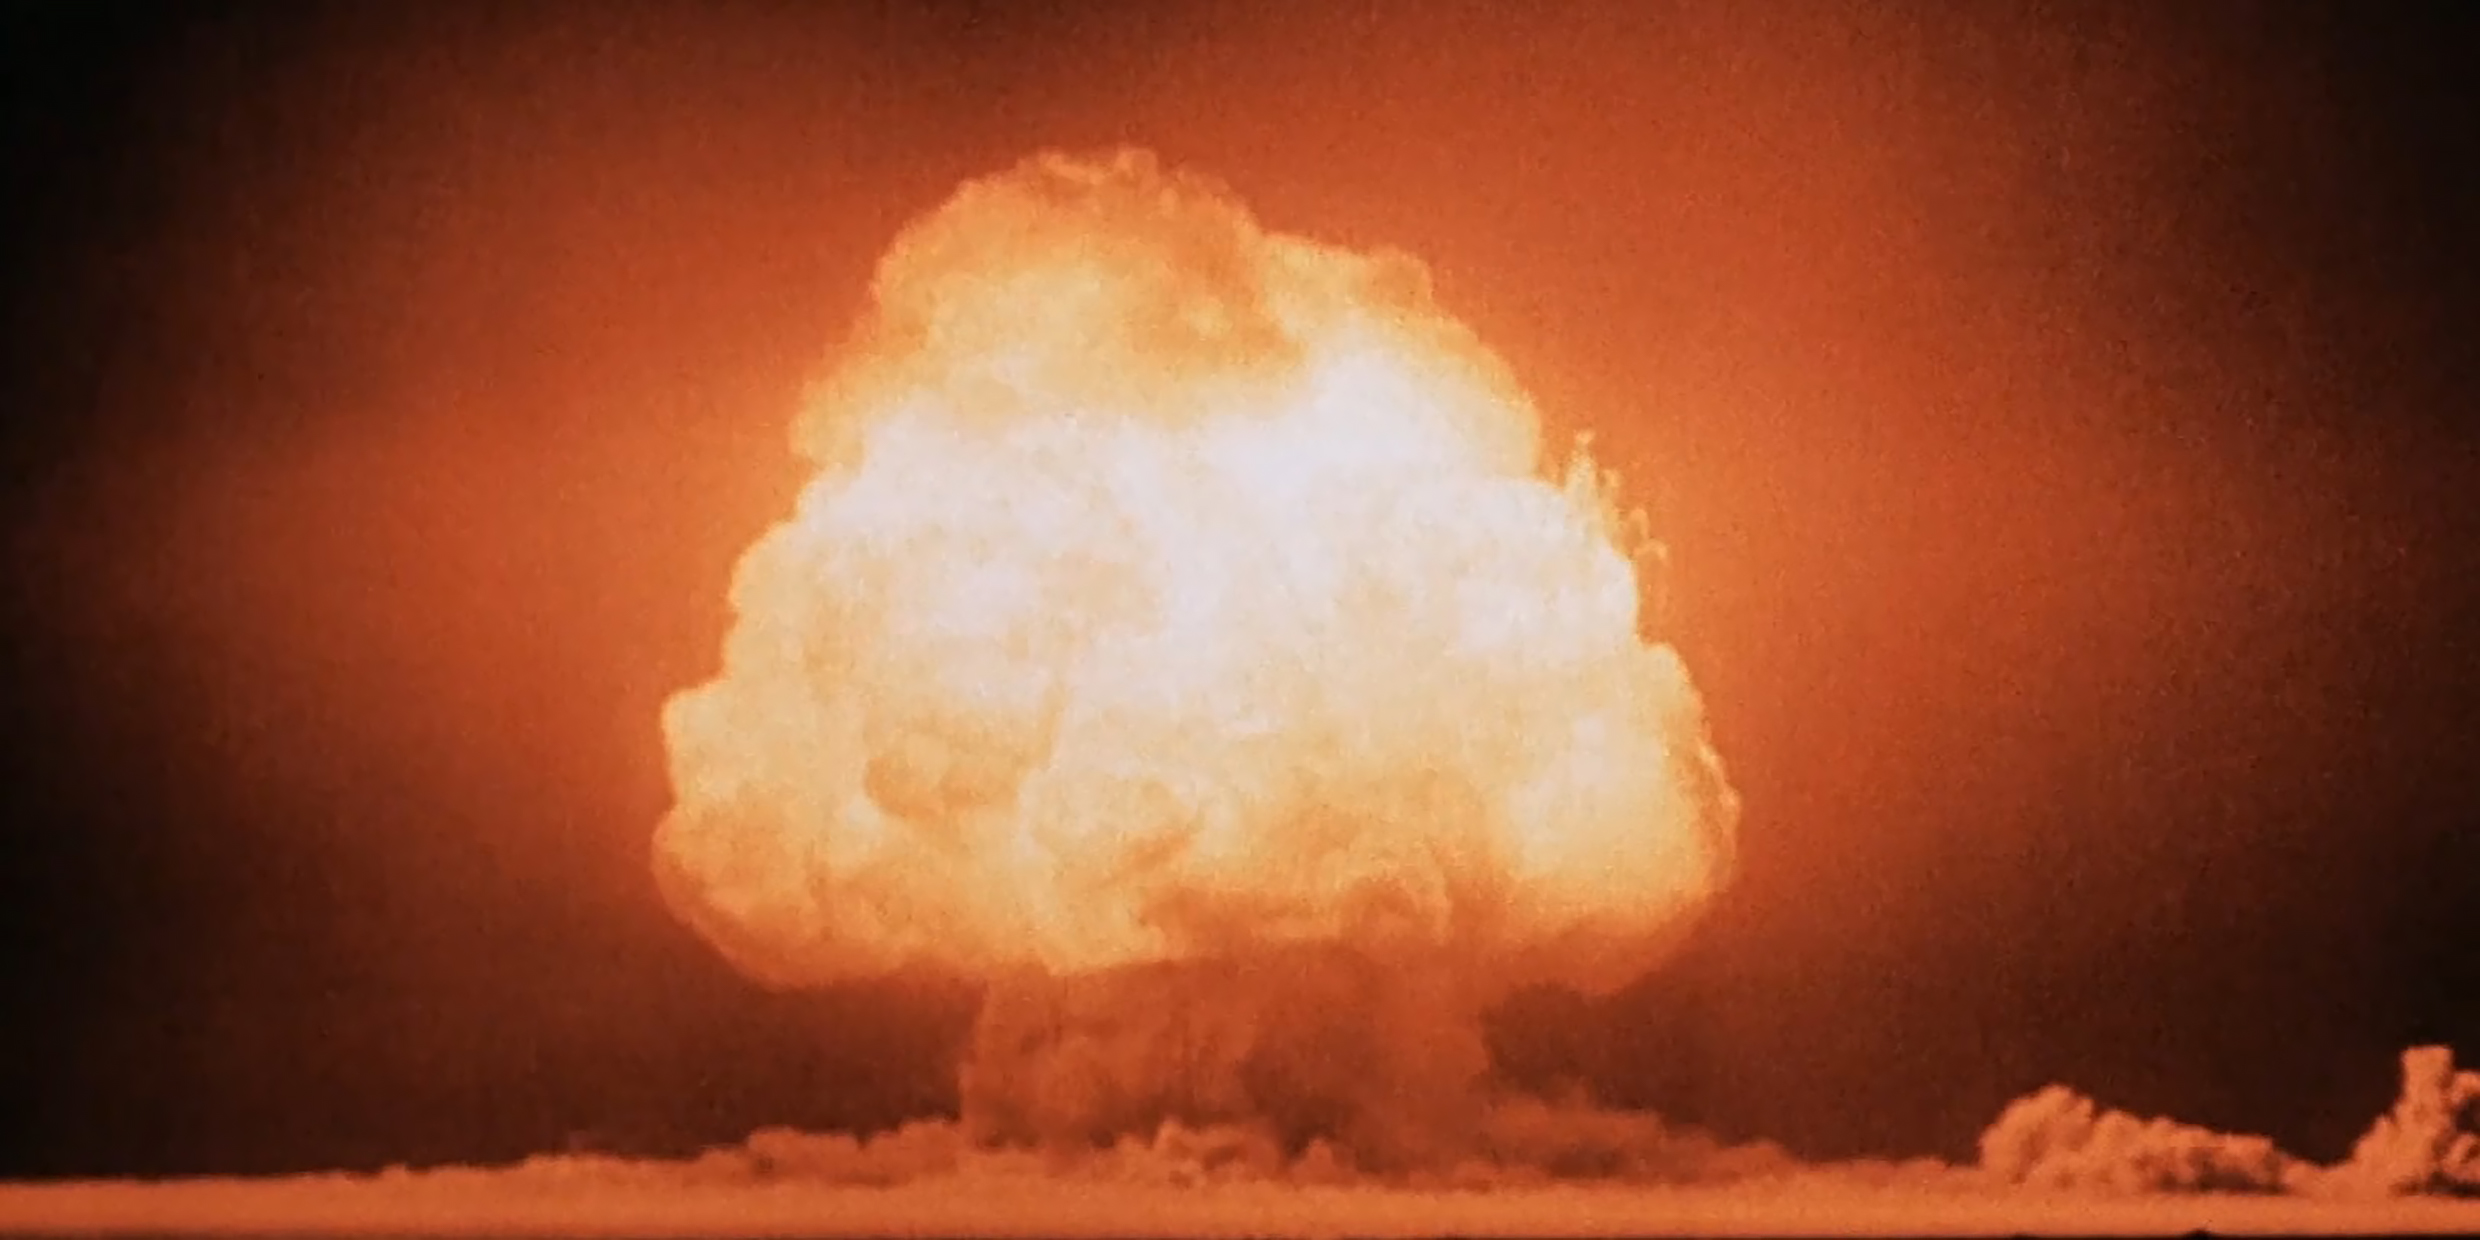 Image of nuclear explosion